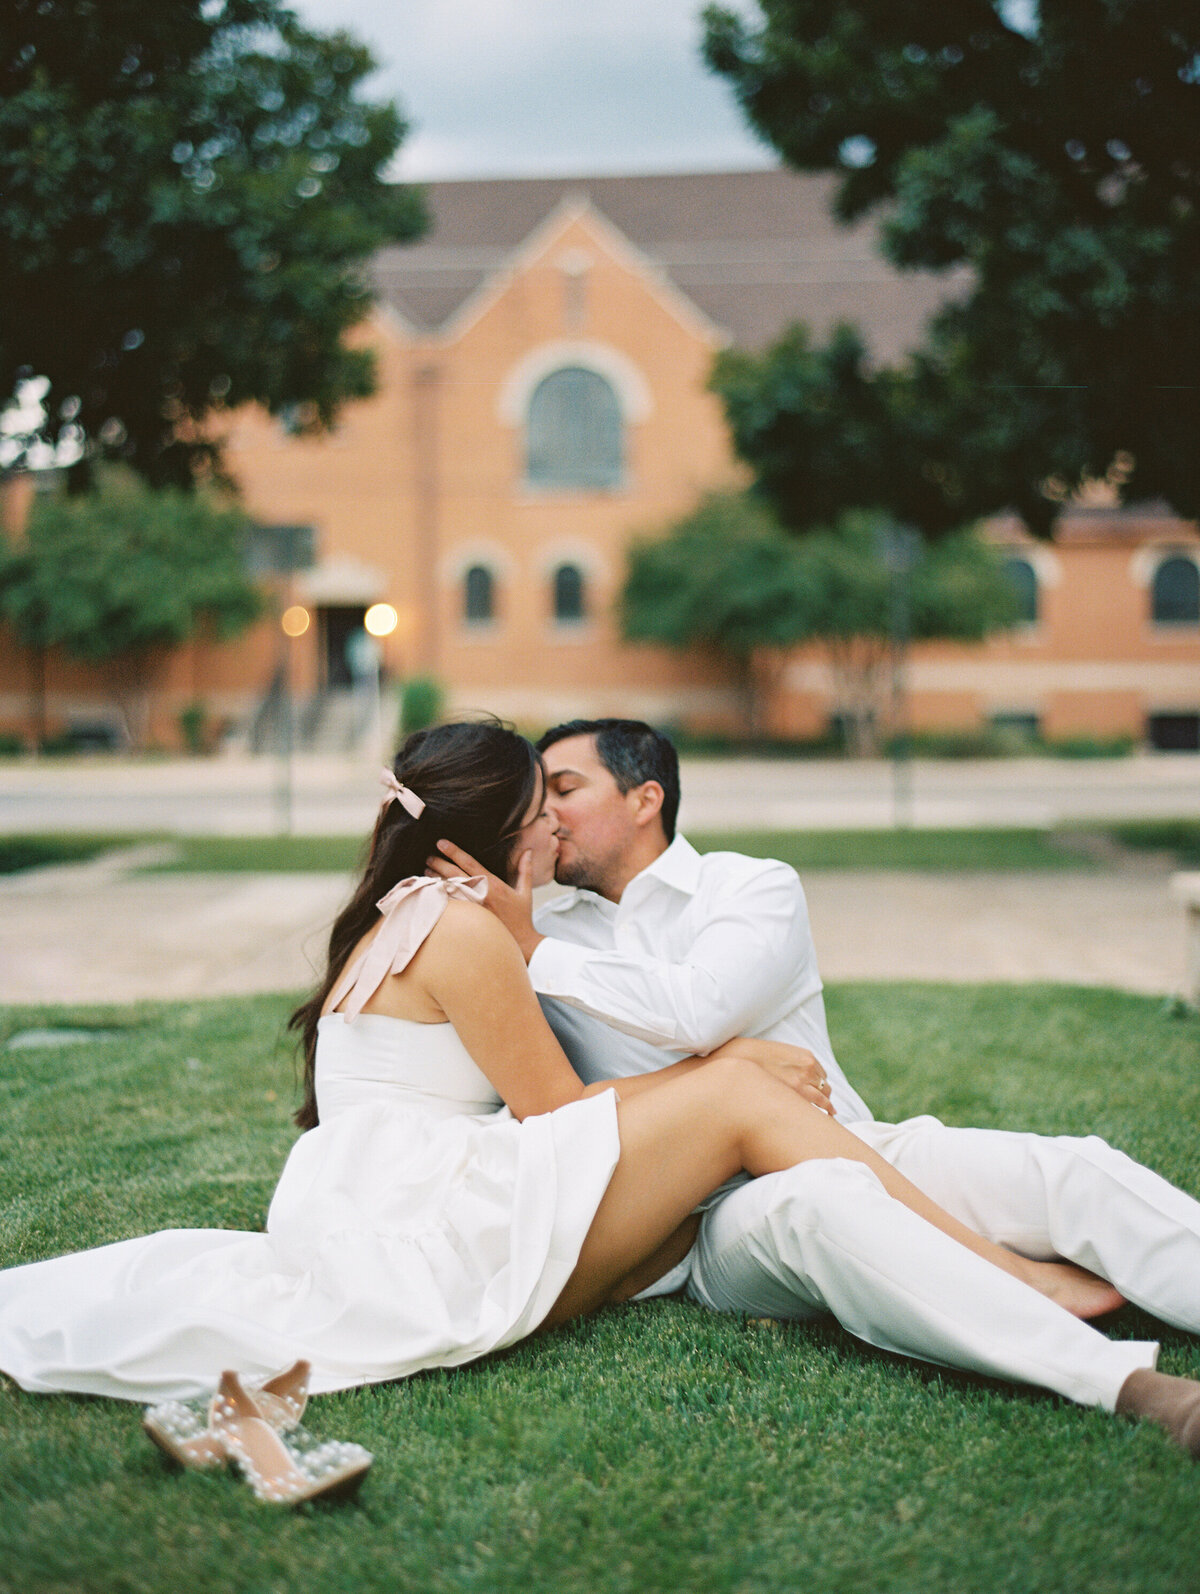 Woman in a white dress kissing a man in a white shirt while sitting in the grass